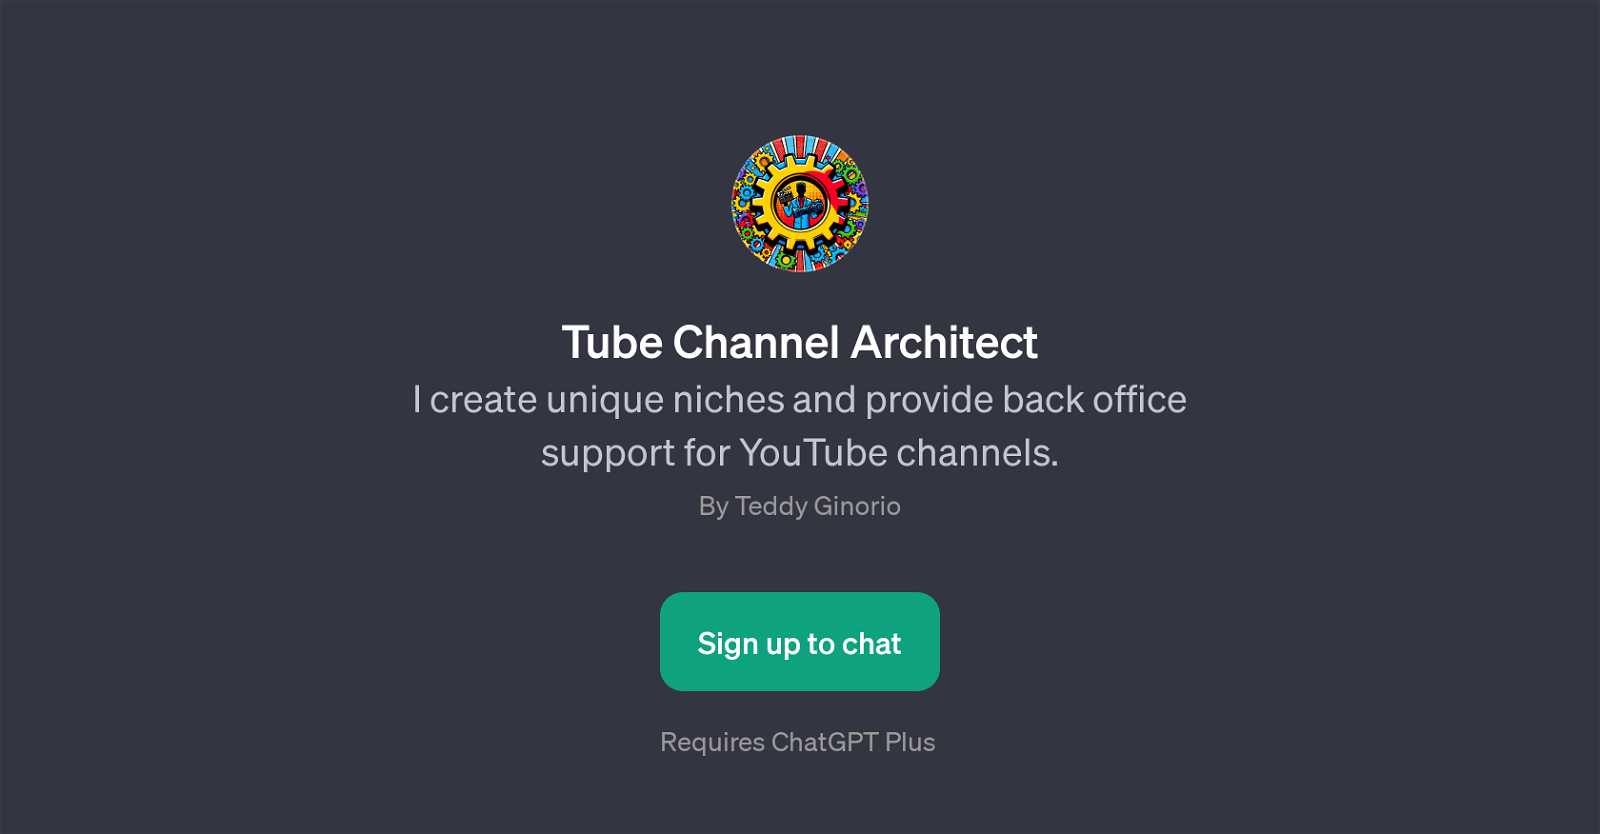 Tube Channel Architect website